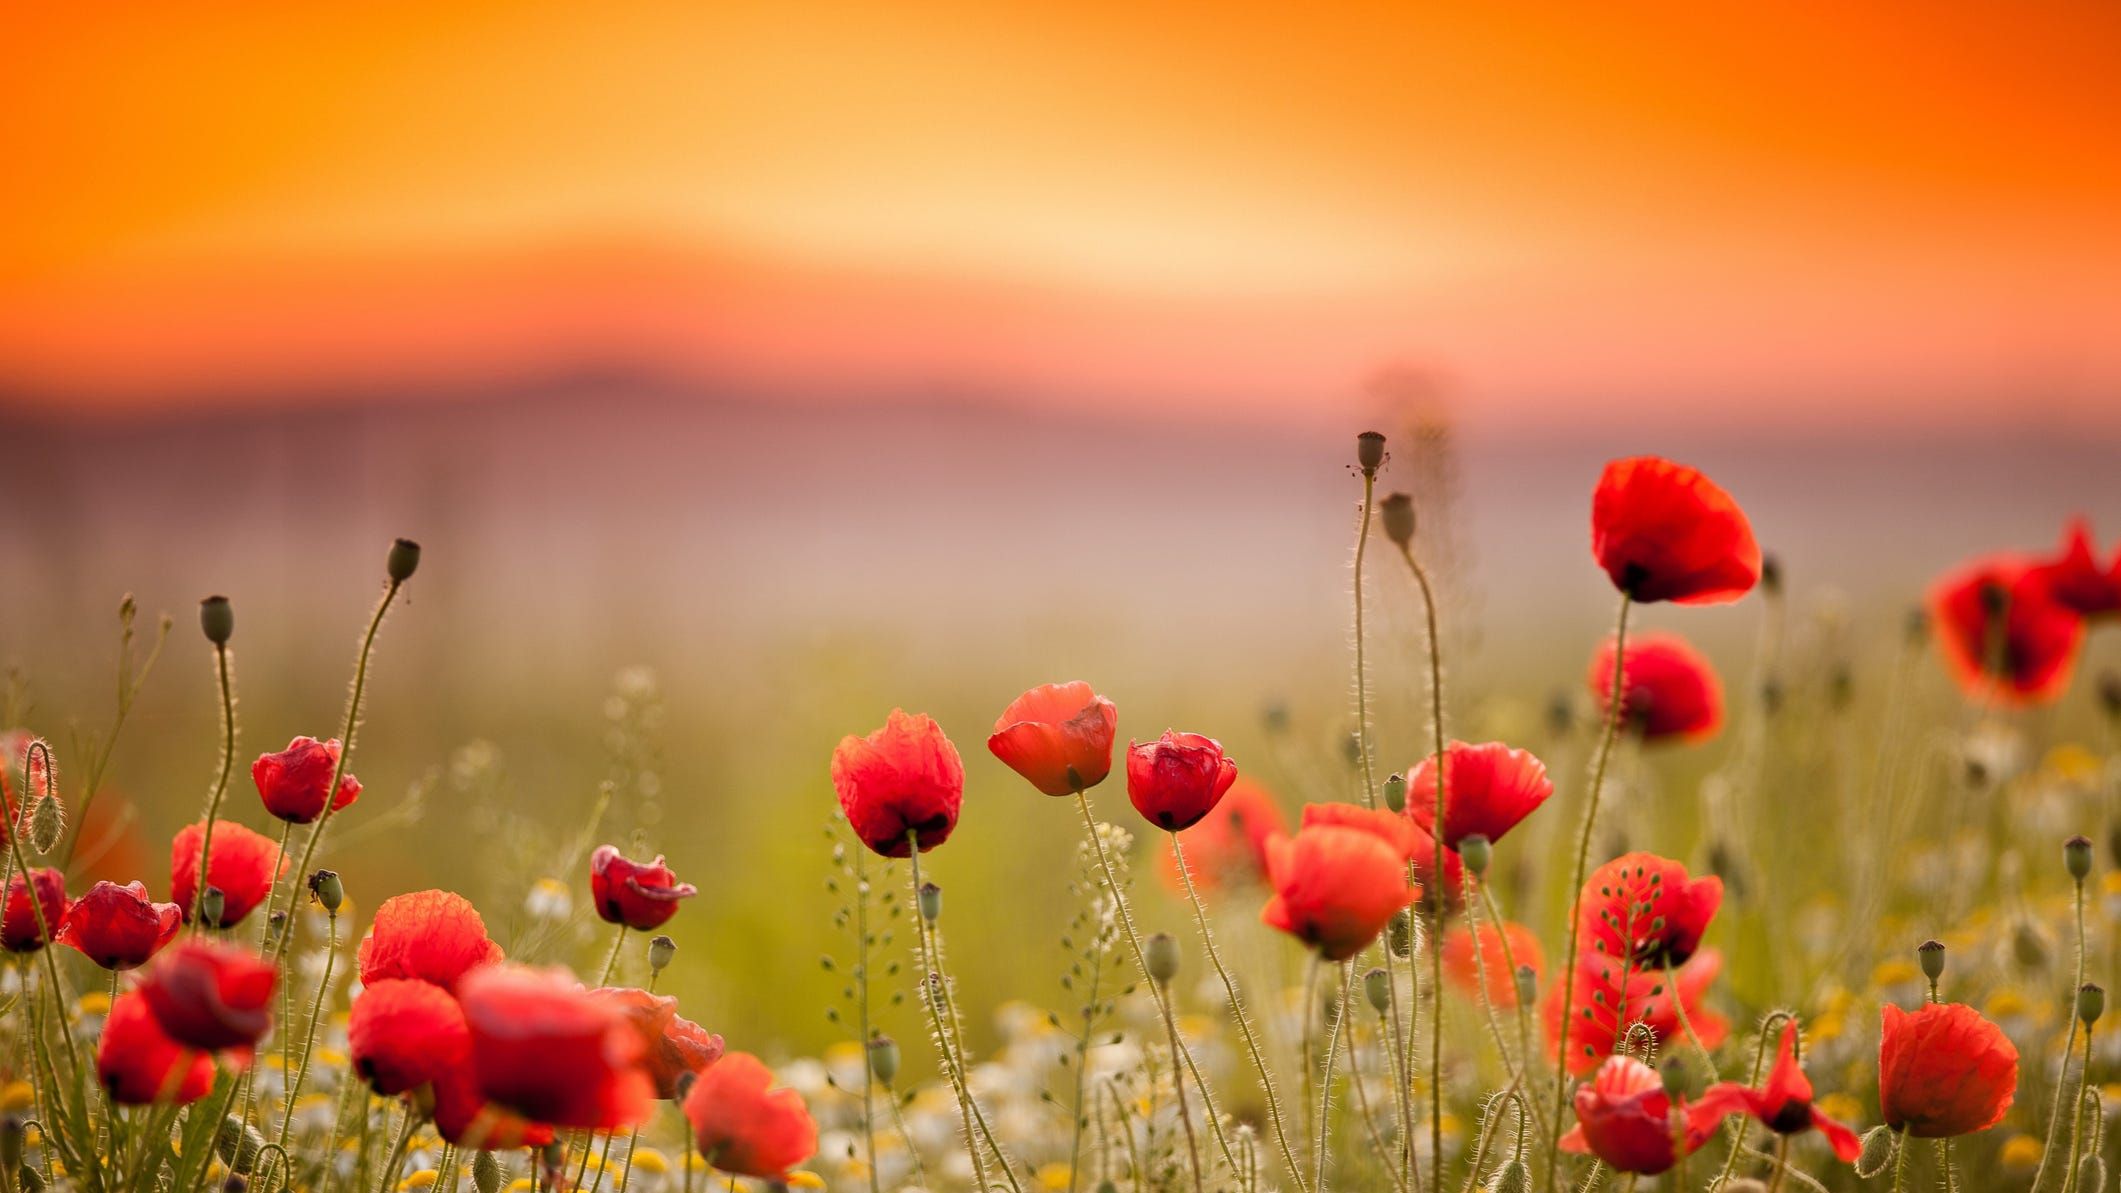 Why is Remembrance Day important?